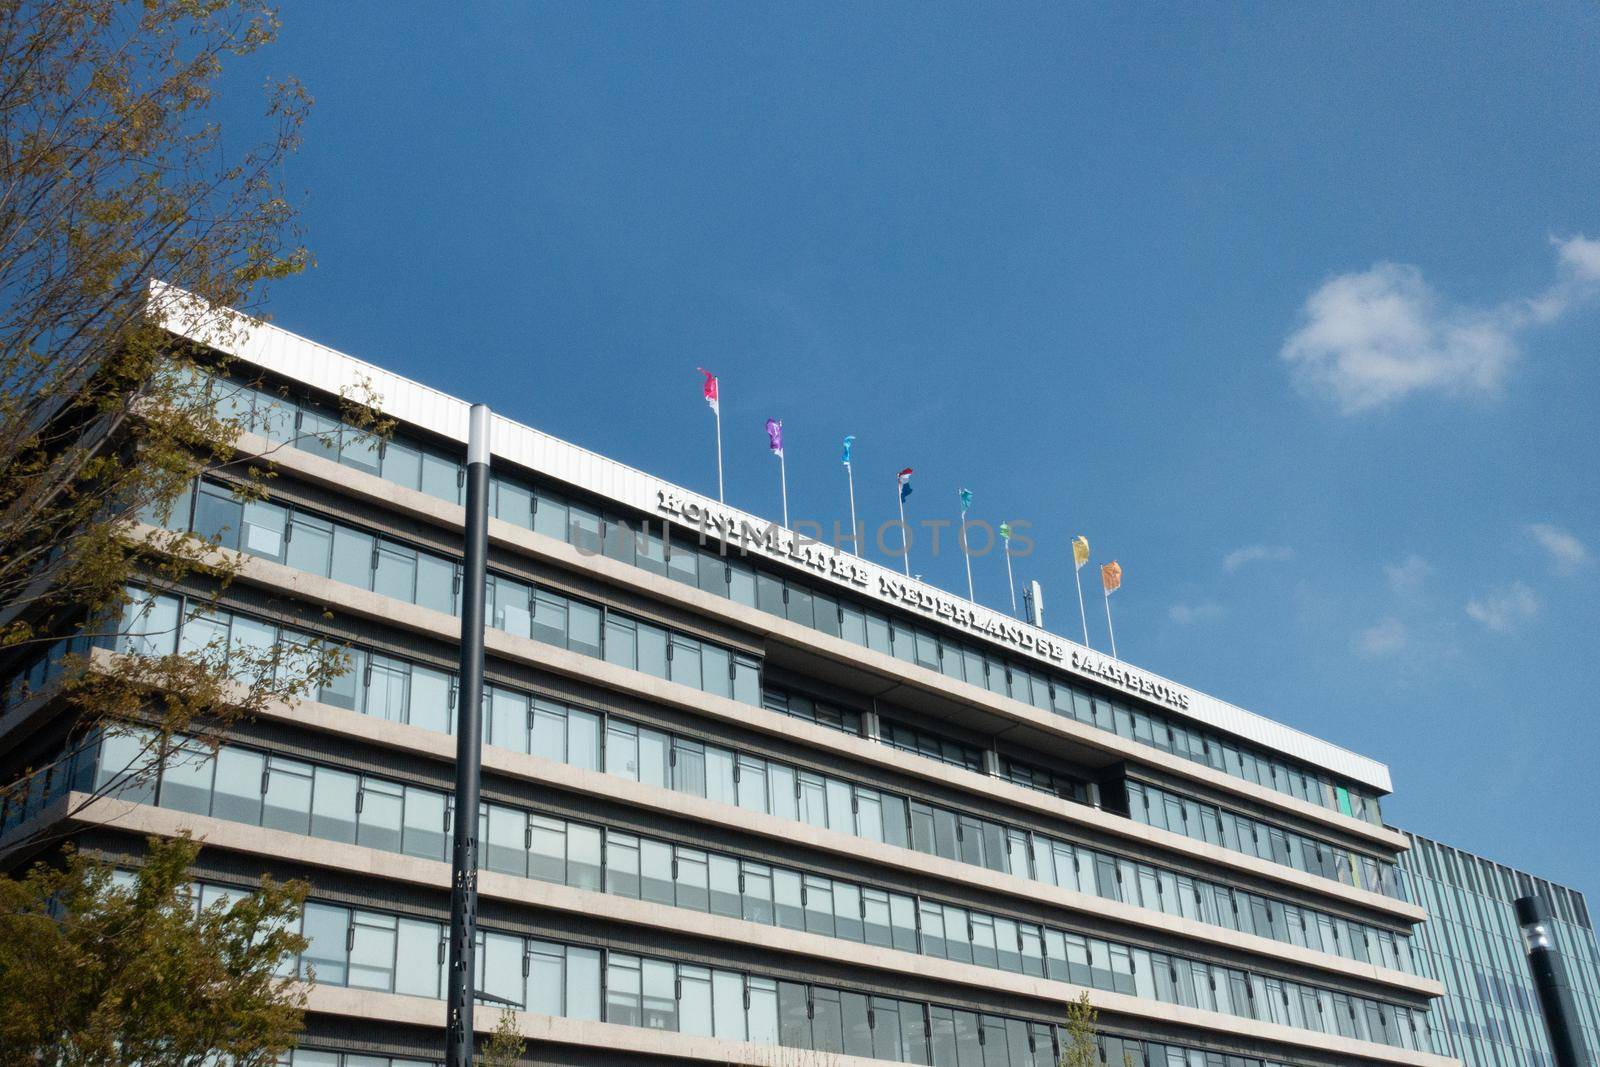 UTRECHT / NETHERLANDS - APRIL 15, 2019: Facade with flags and a blue sky Dutch conference centre Jaarbeurs